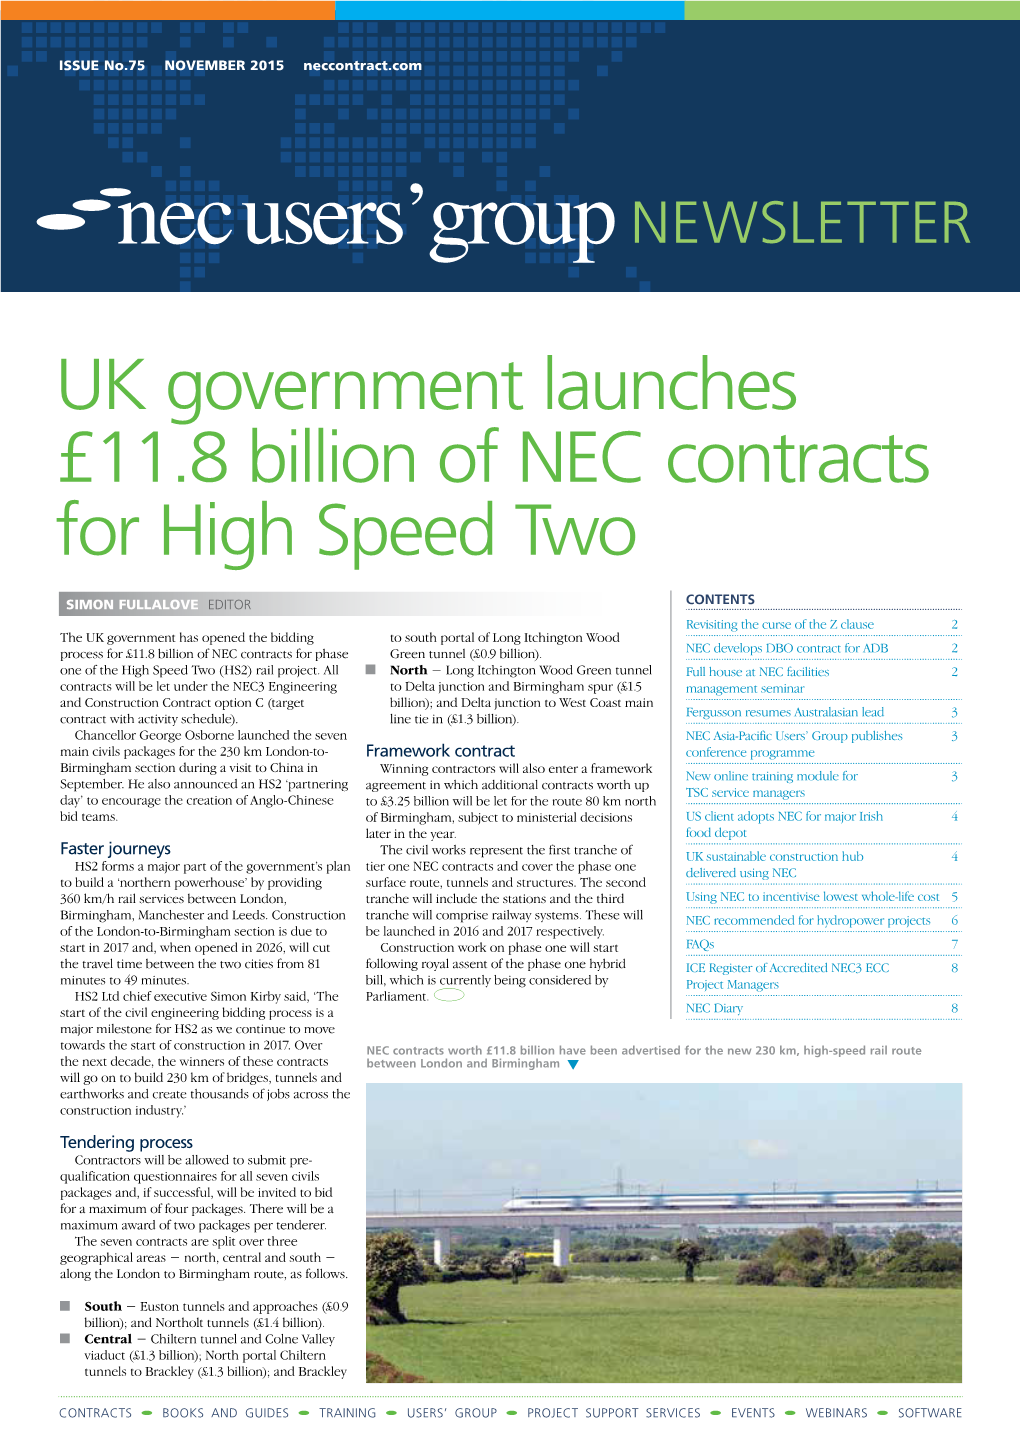 UK Government Launches £11.8 Billion of NEC Contracts for High Speed Two